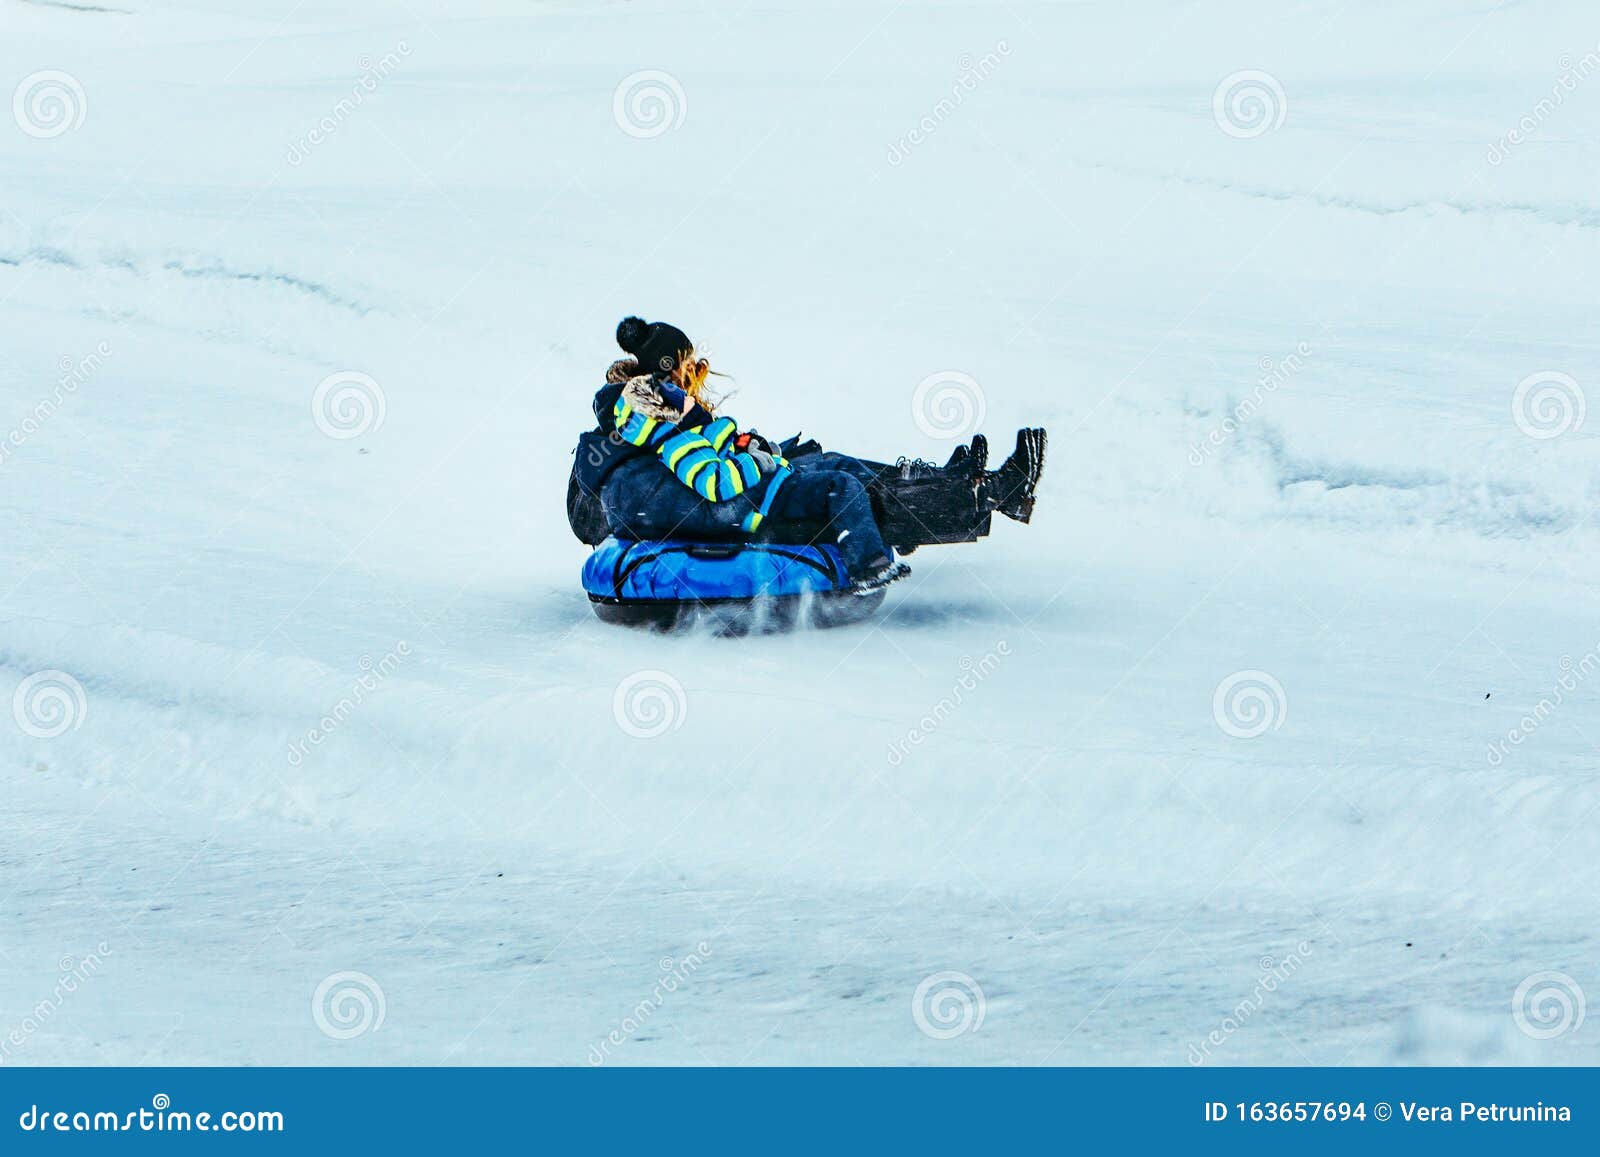 Man skier in black ski suit and goggles skiing downhill trough